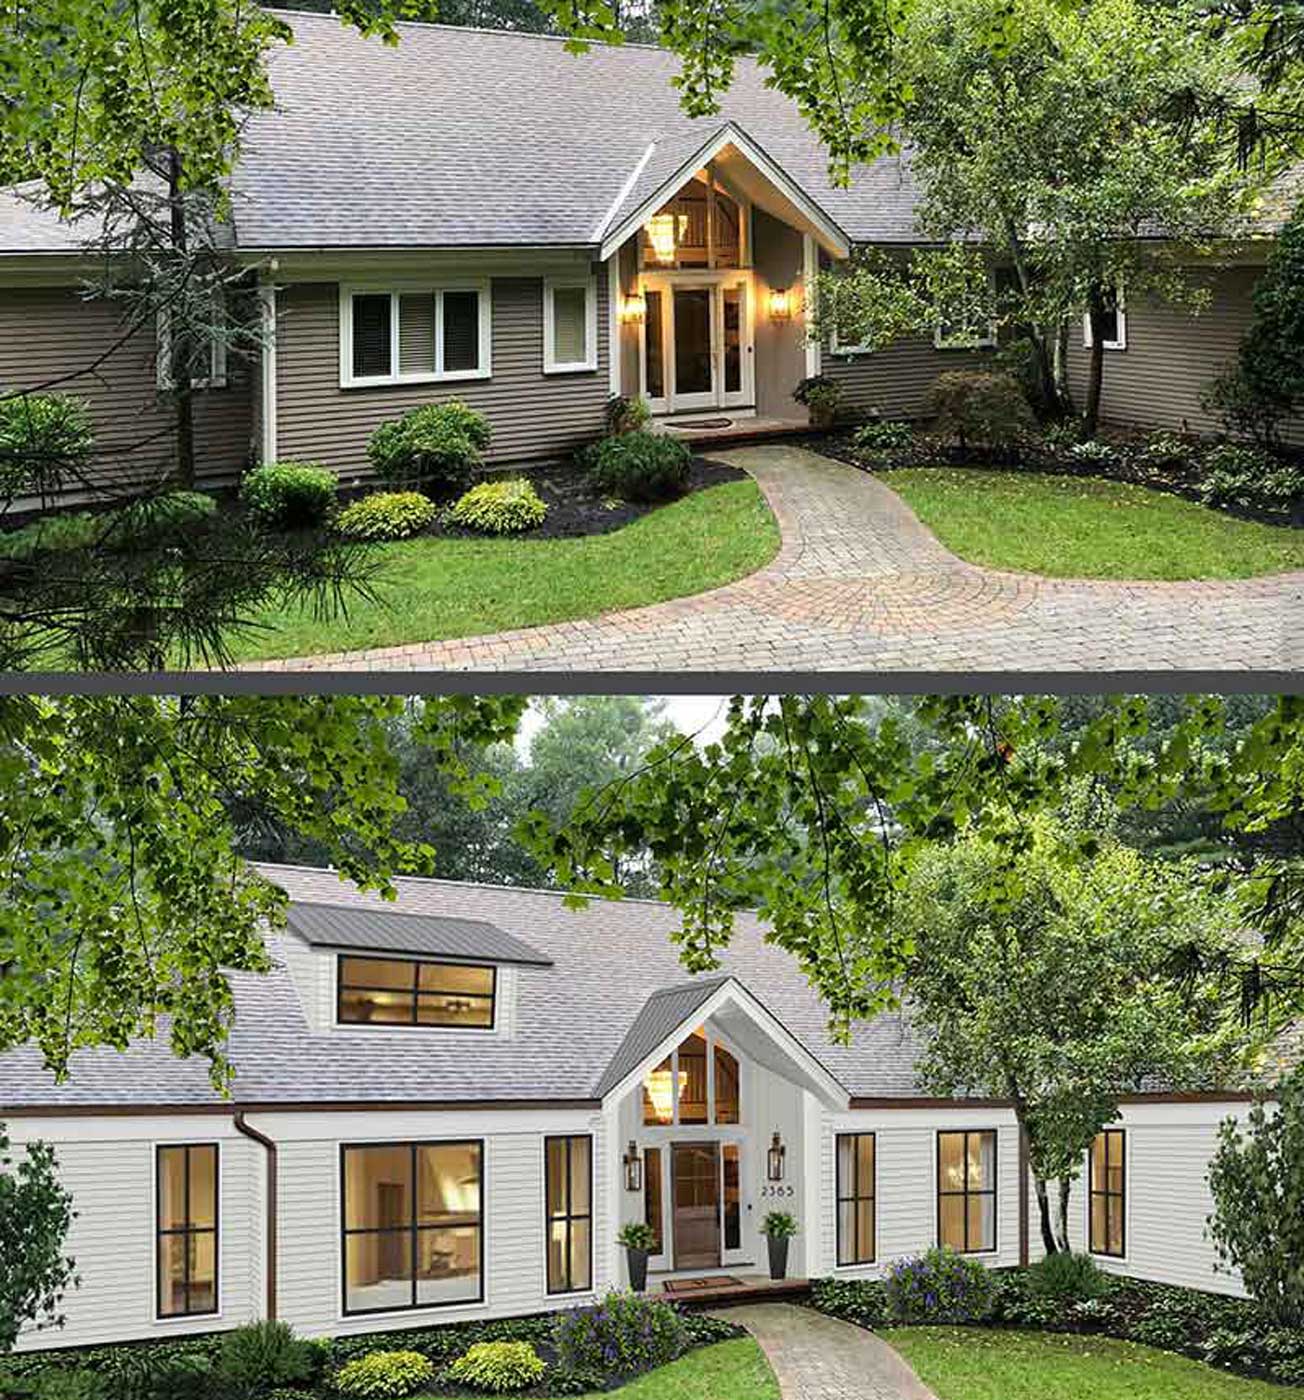 Before and after images of brick&batten home project featuring new windows and exterior color.